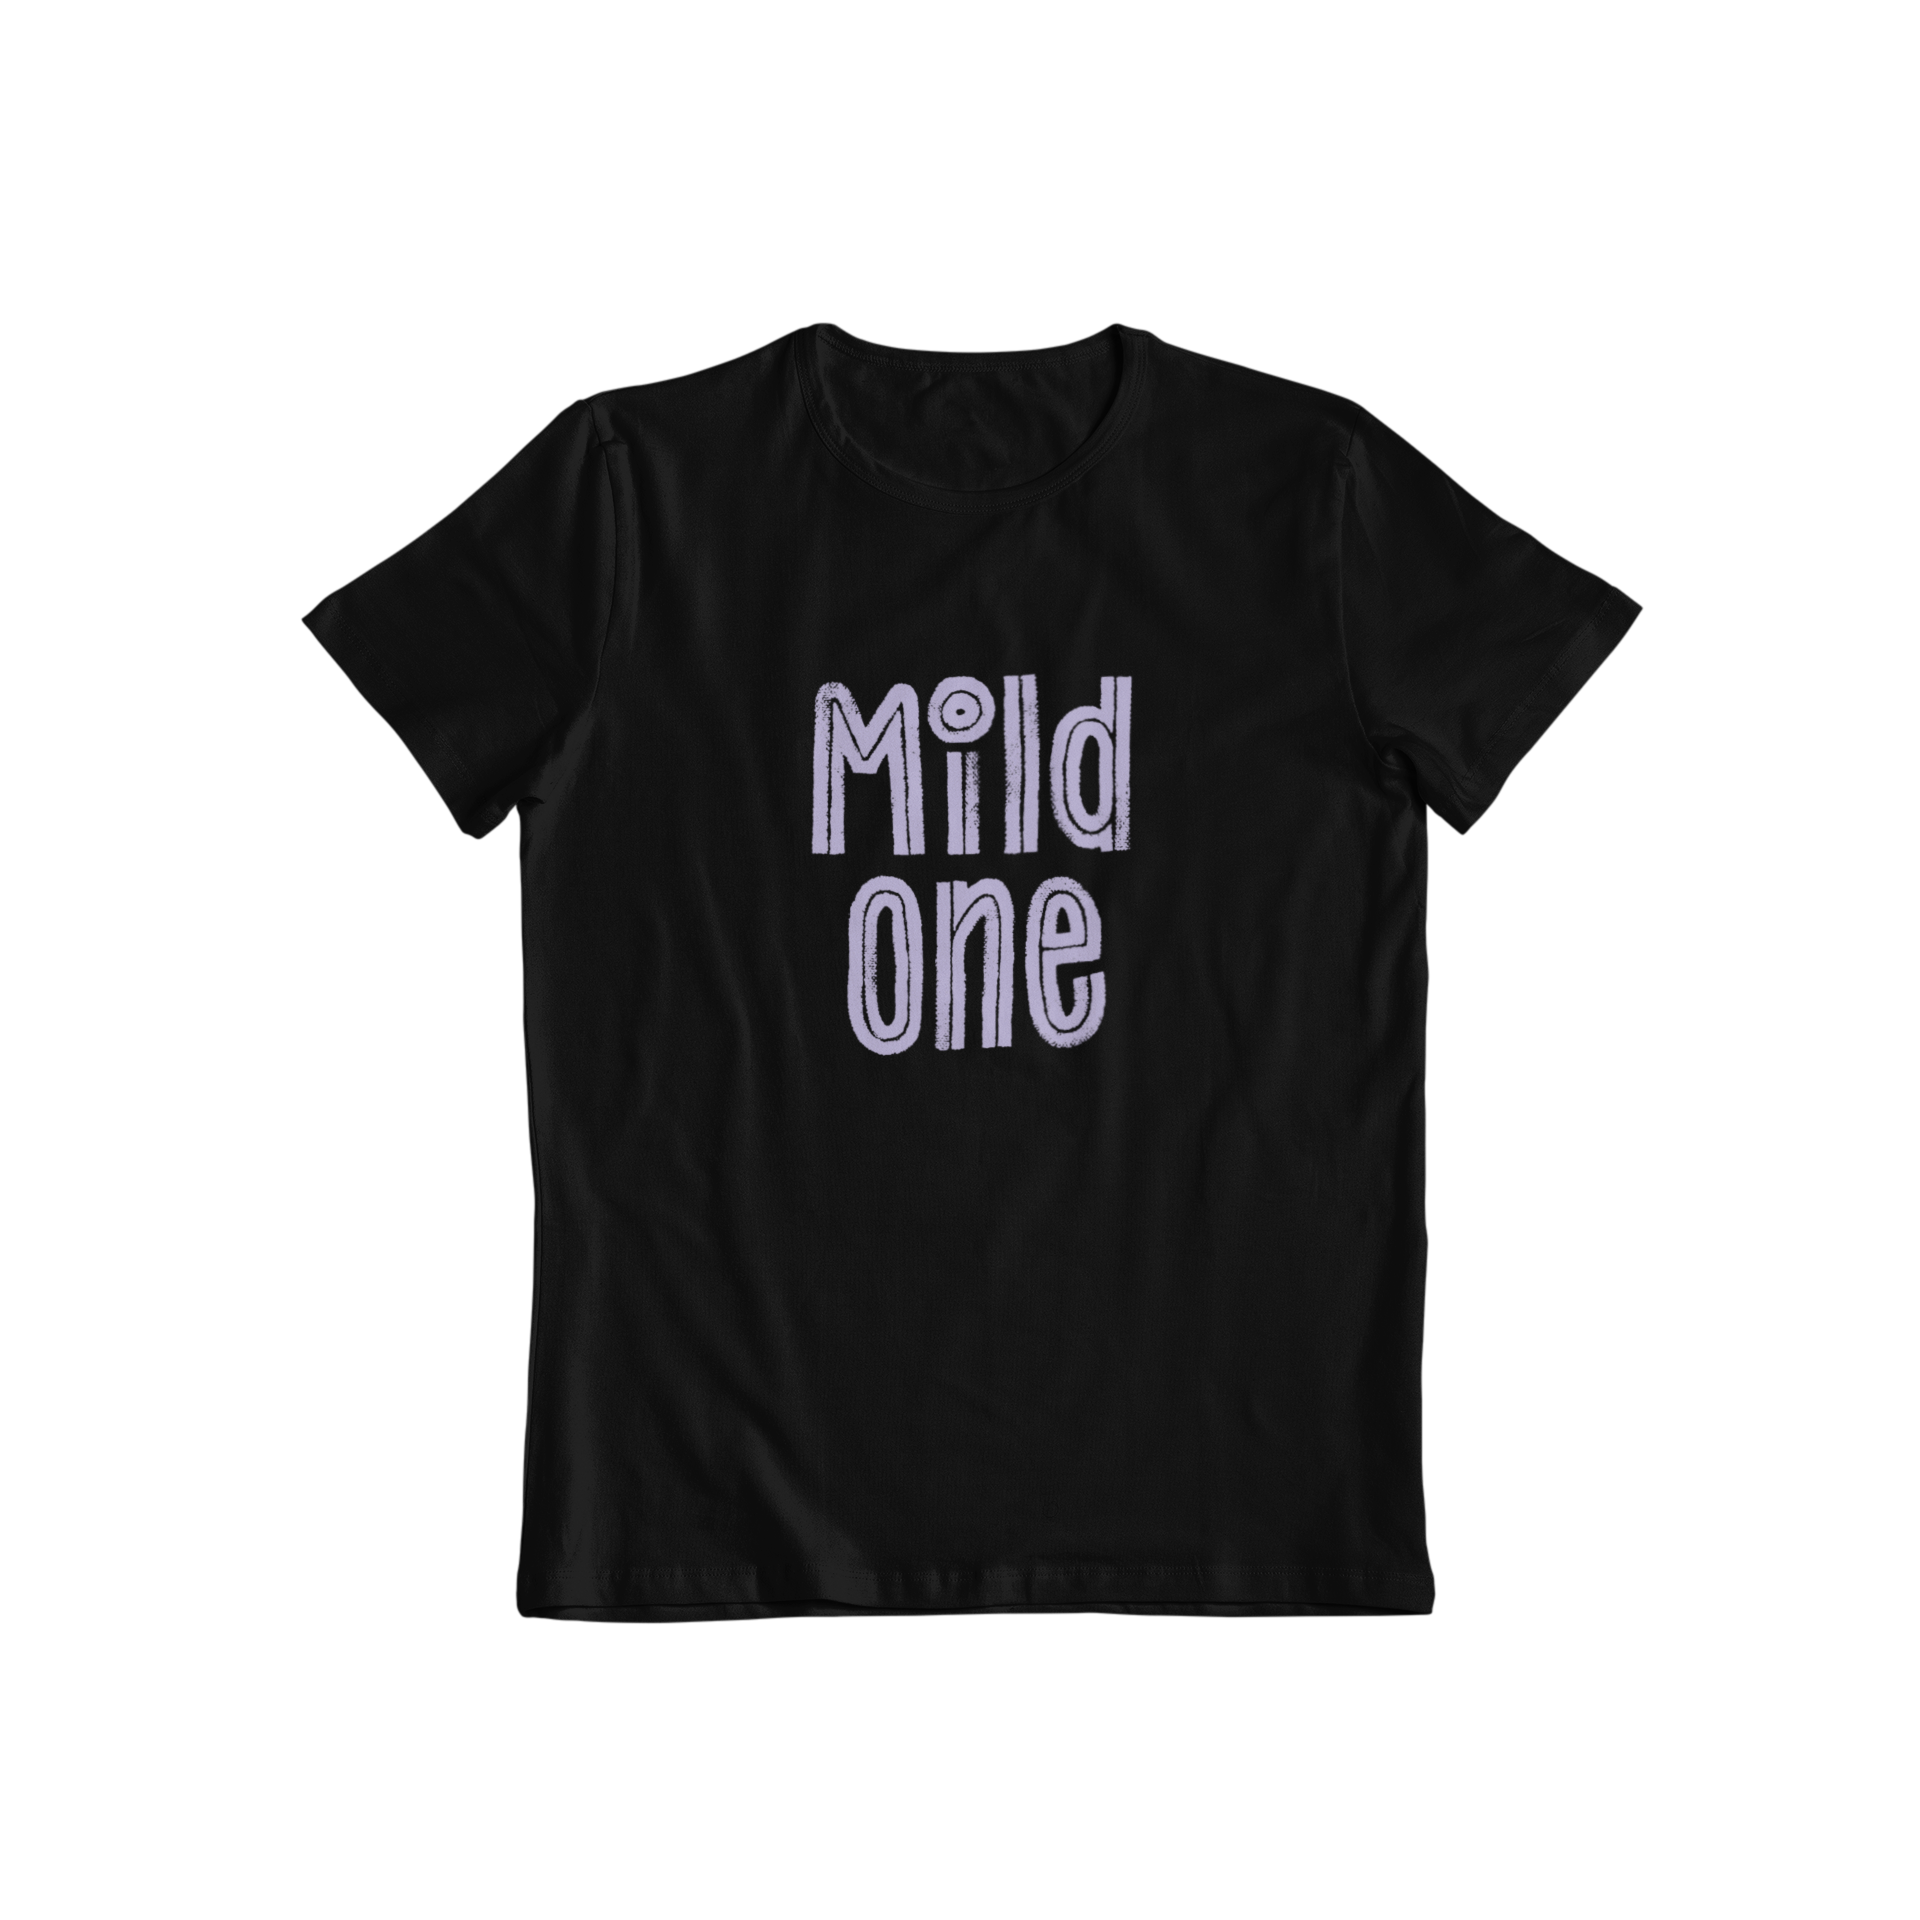 The Mild One T-shirt is the perfect complement to our Wild One t-shirt. Made with a matching design, it's a stylish choice for any occasion. Add a touch of unity to your wardrobe with this versatile piece.